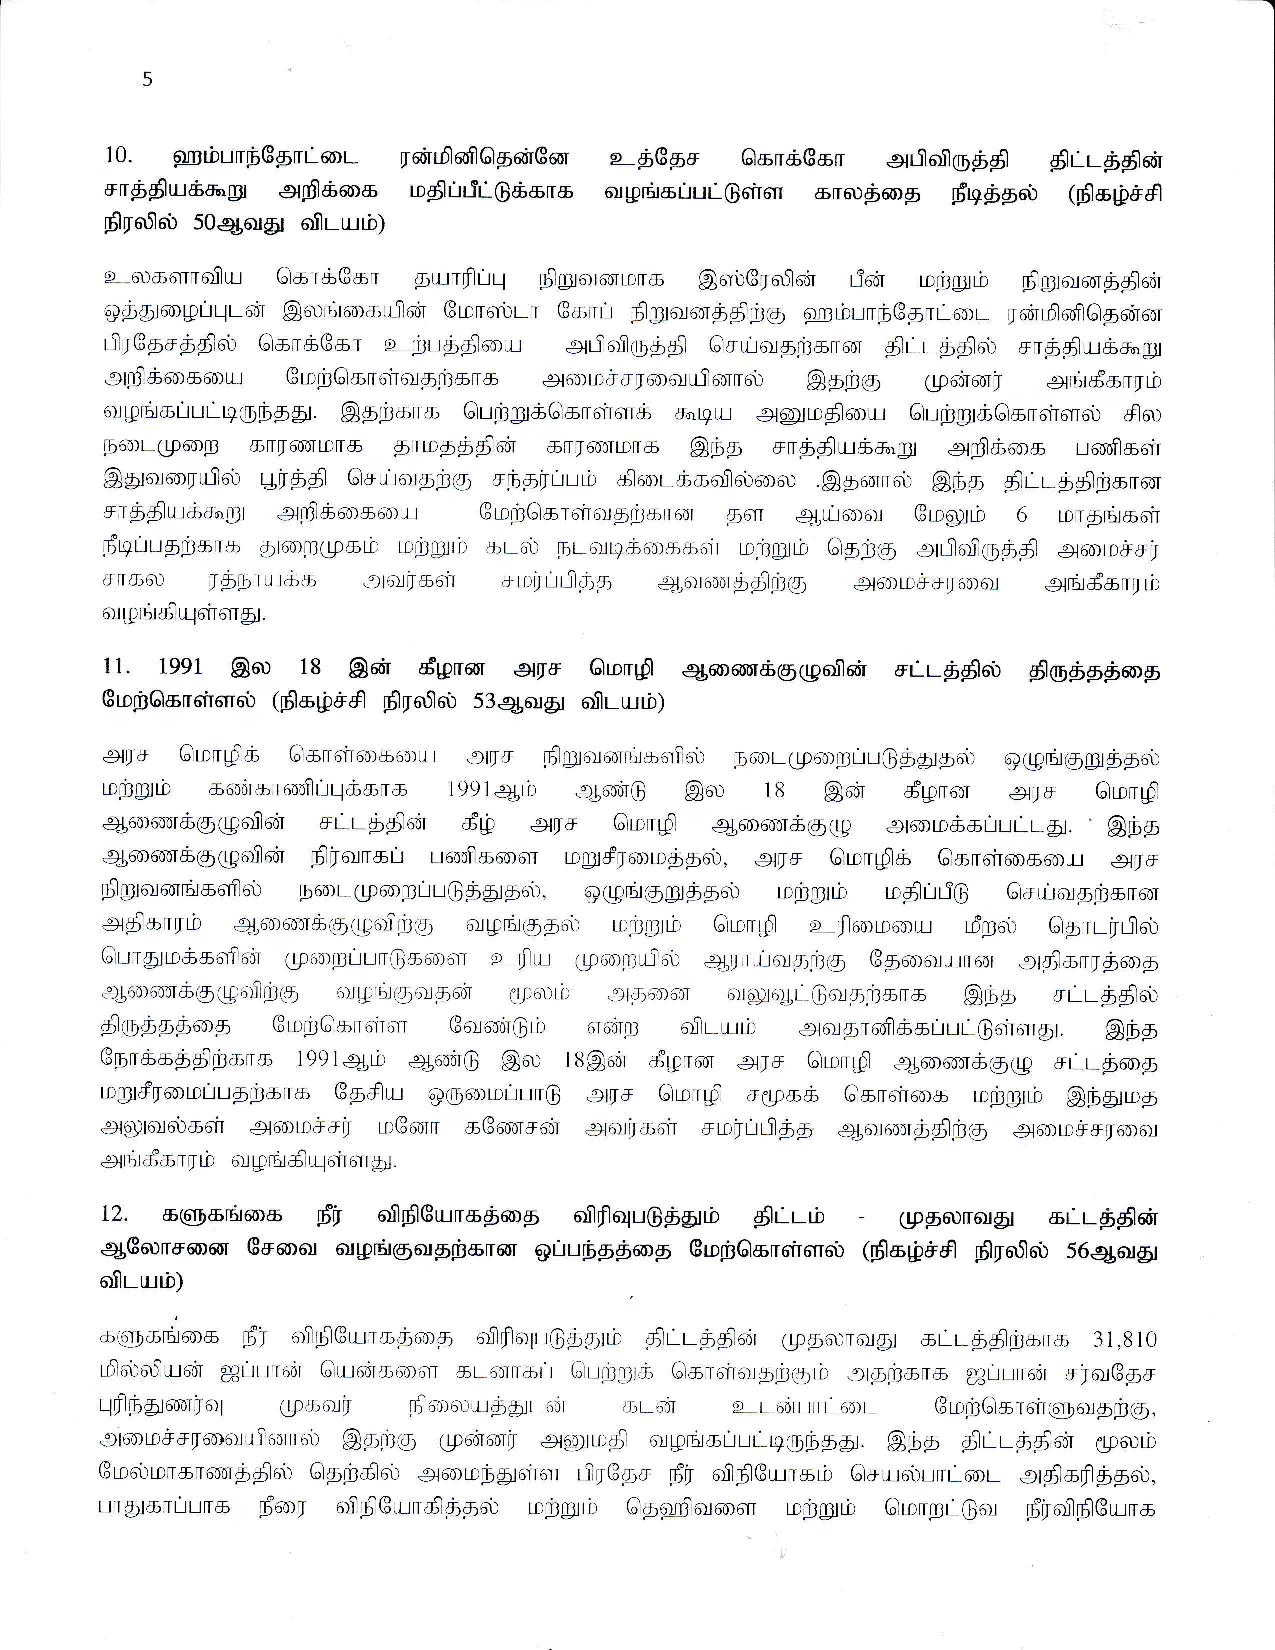 Cabinet Decision on 21.05.2019 Tamil page 006